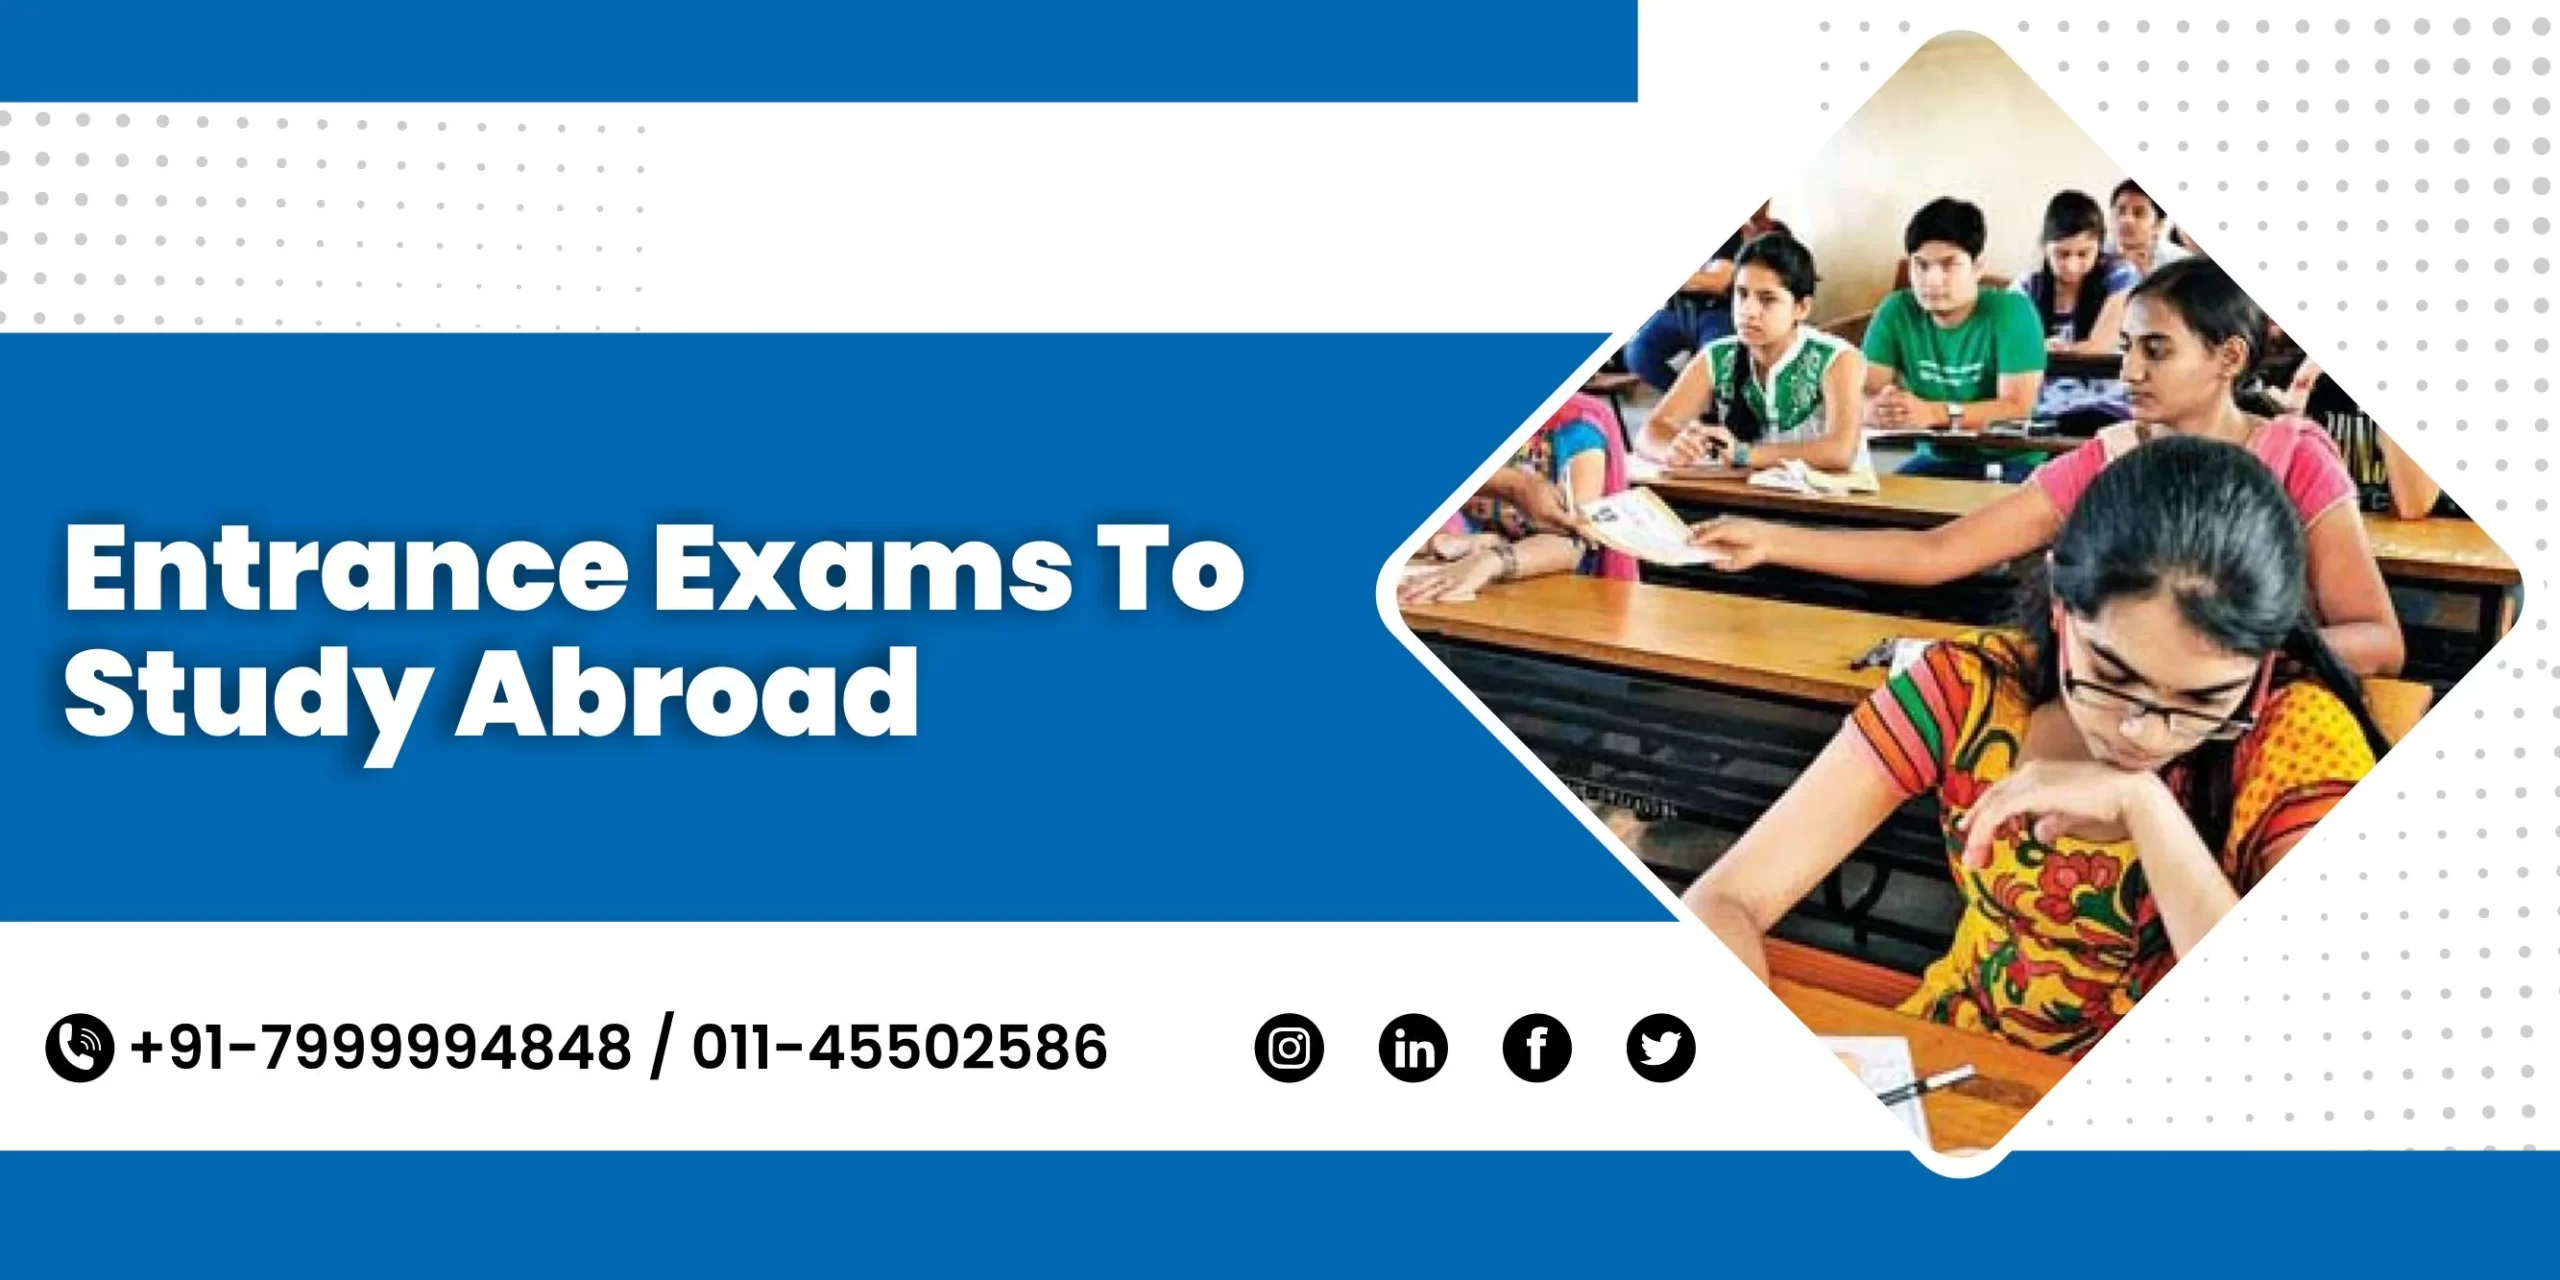 Entrance exams to study abroad